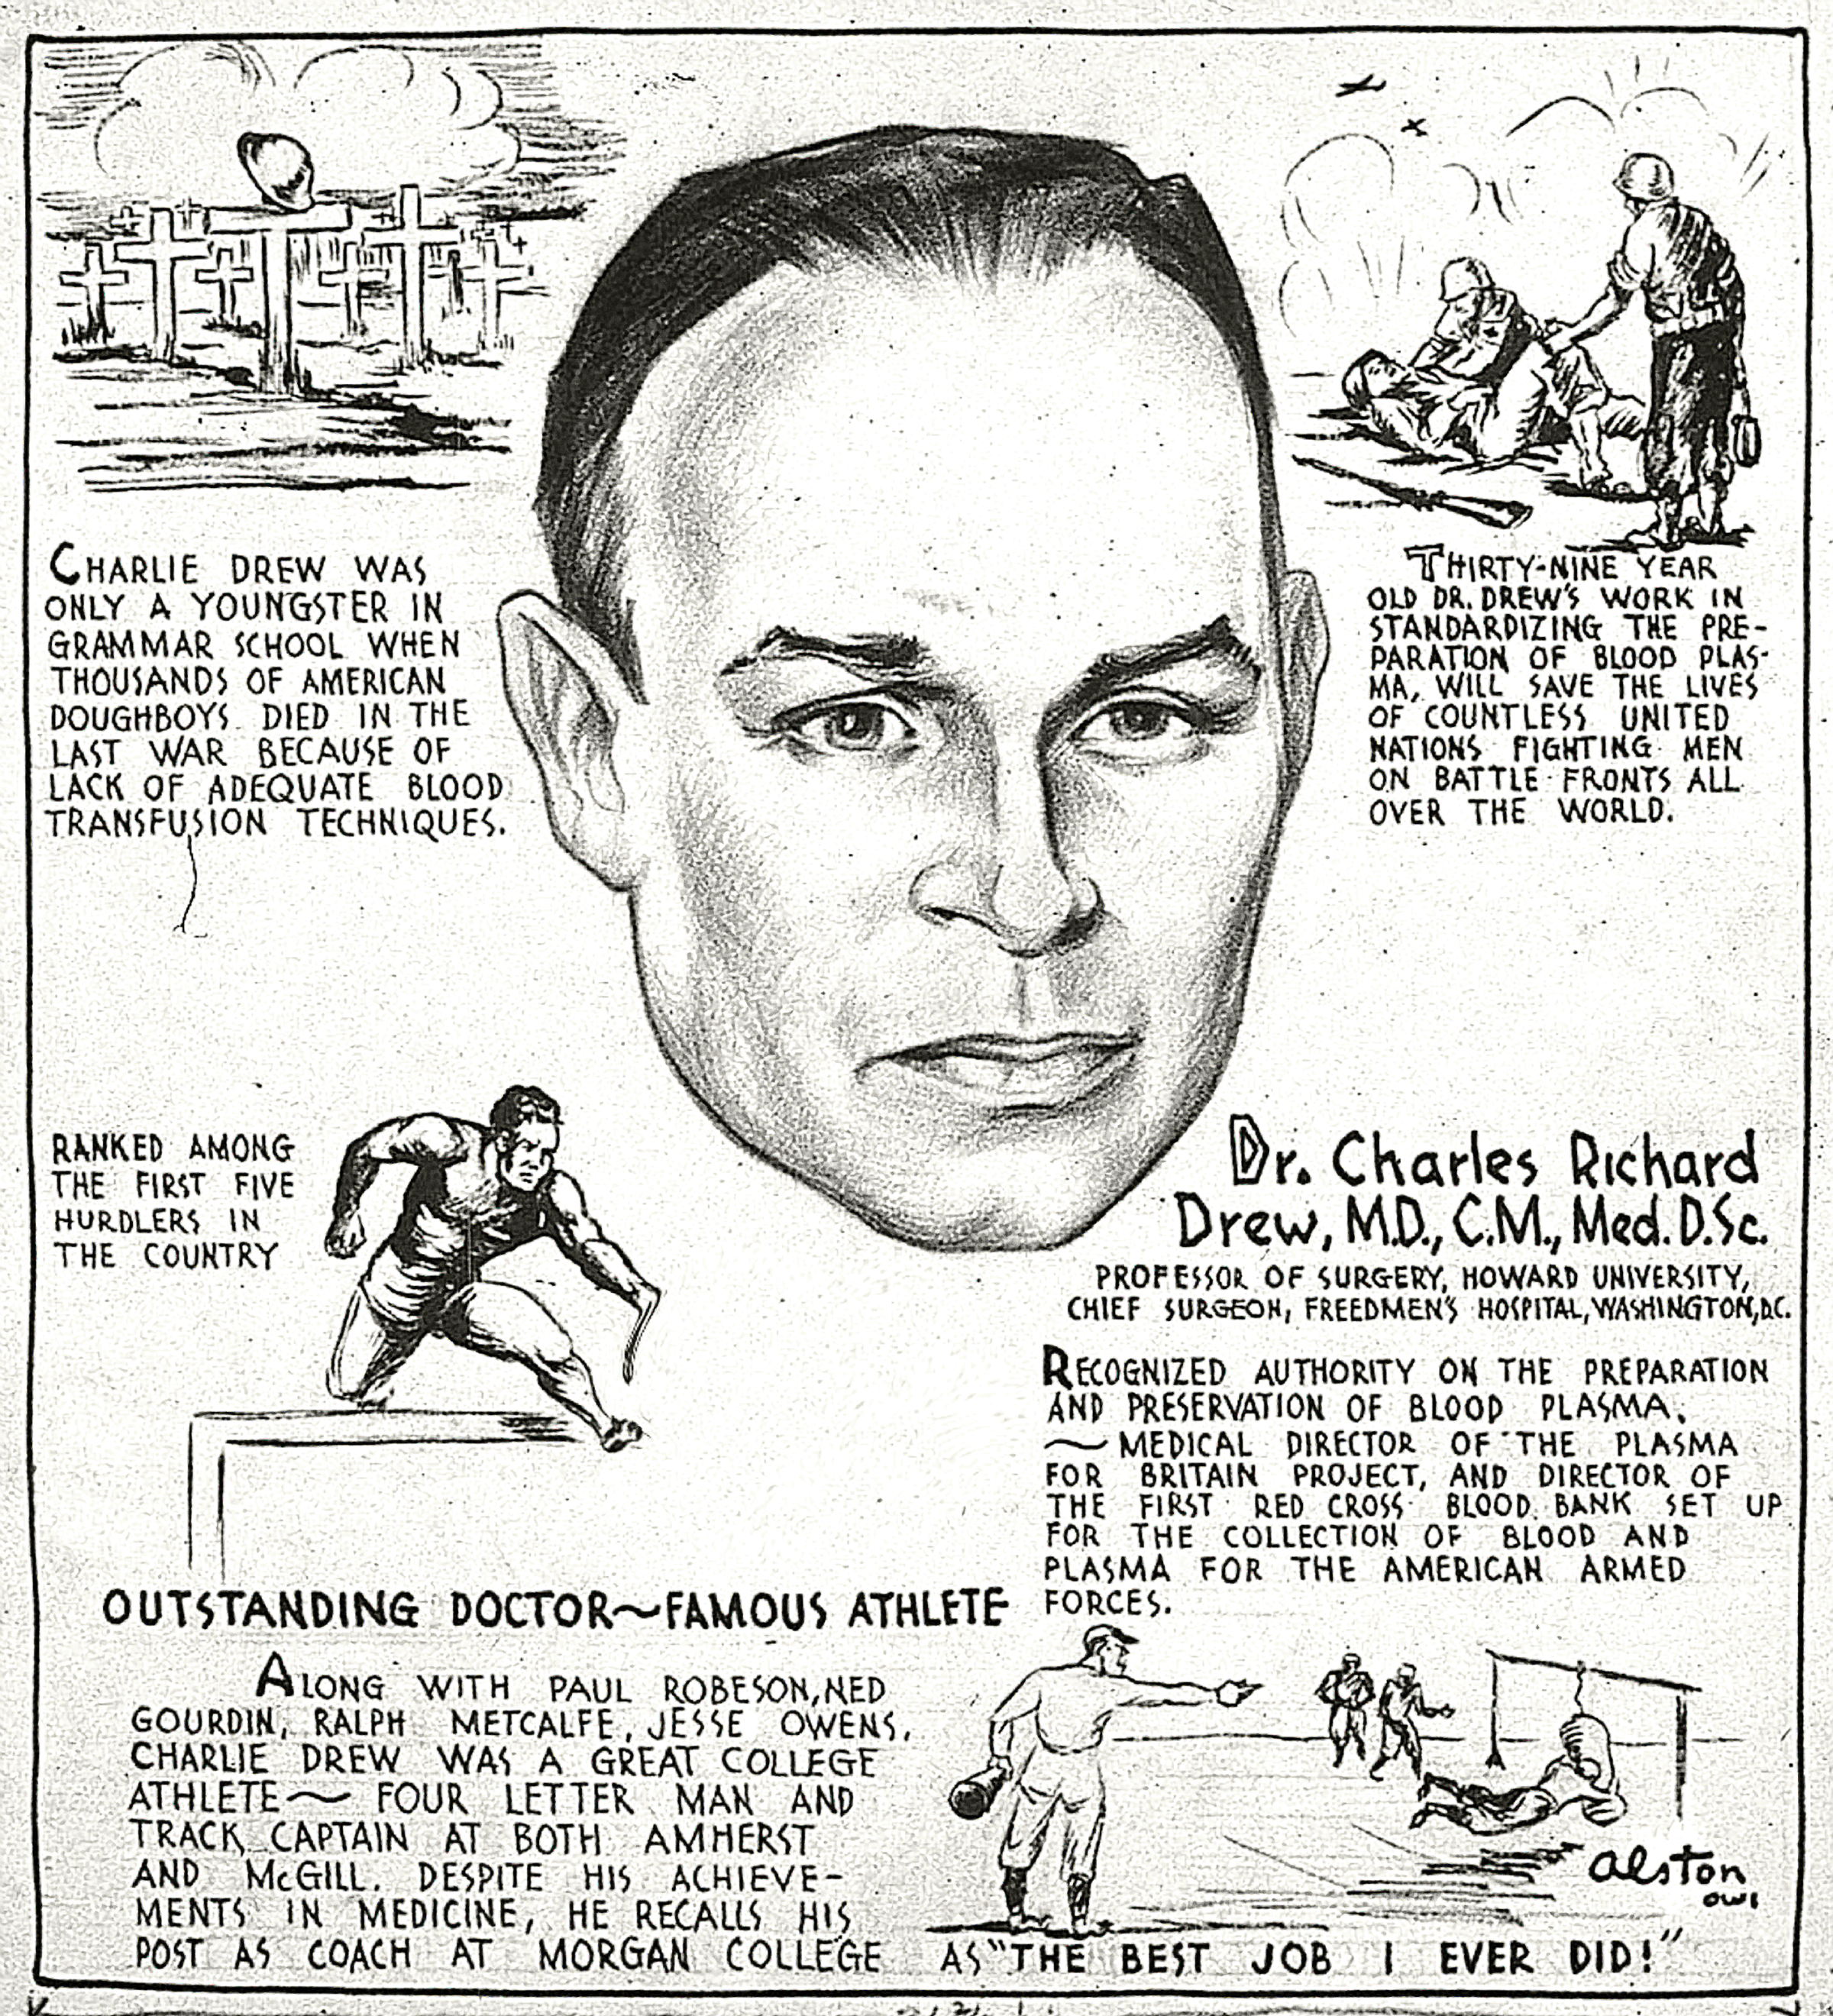 Cartoon for the Office of War Information describing 
Dr. Charles Richard Drew, by Charles Alston, 1943. Source: National Archives.